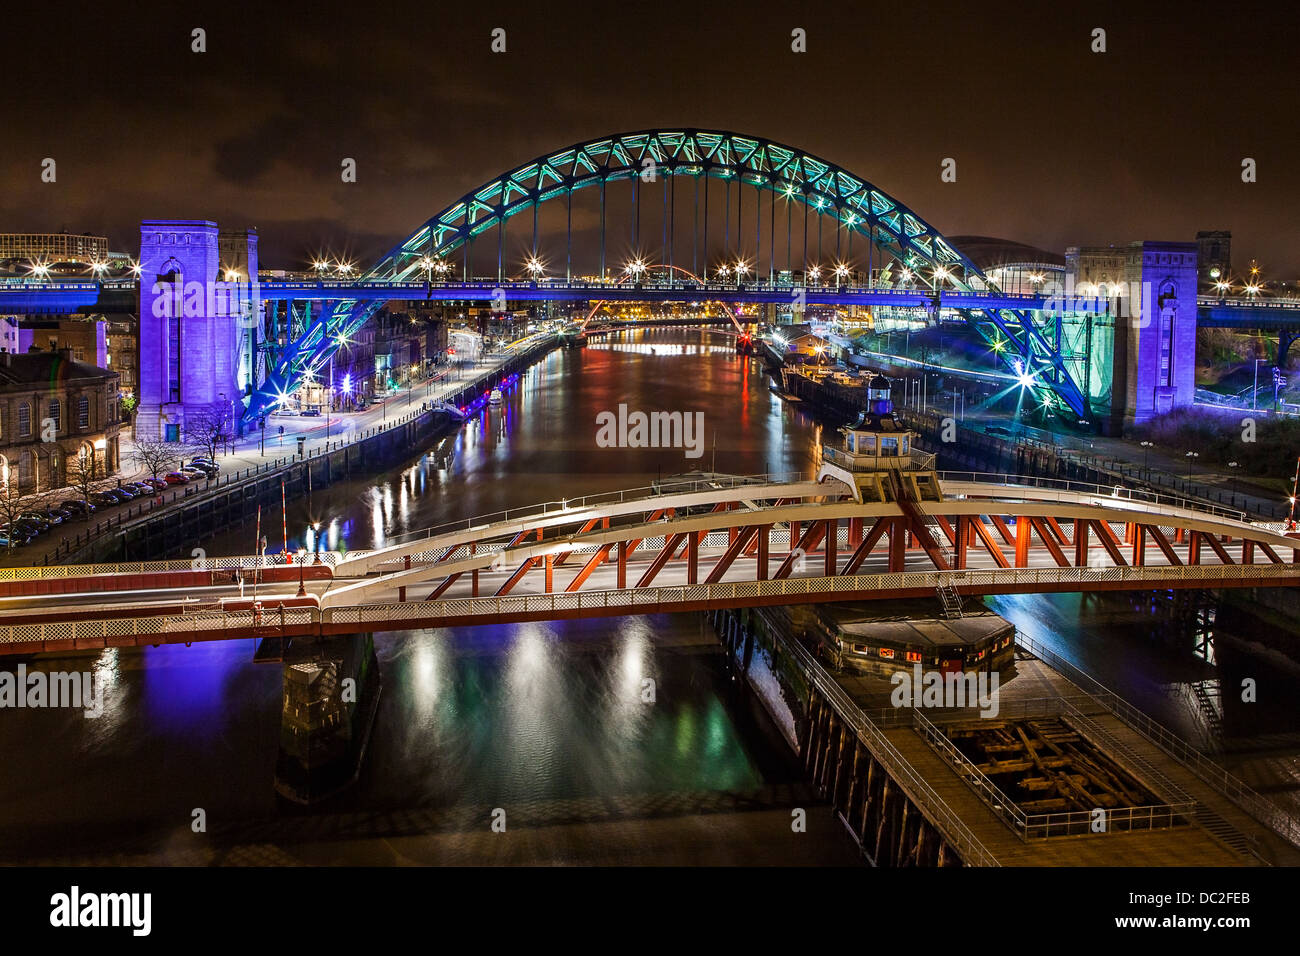 River Tyne bridges in Newcastle/Gateshead taken on a long exposure at night showing the bridges illuminated in colour Stock Photo